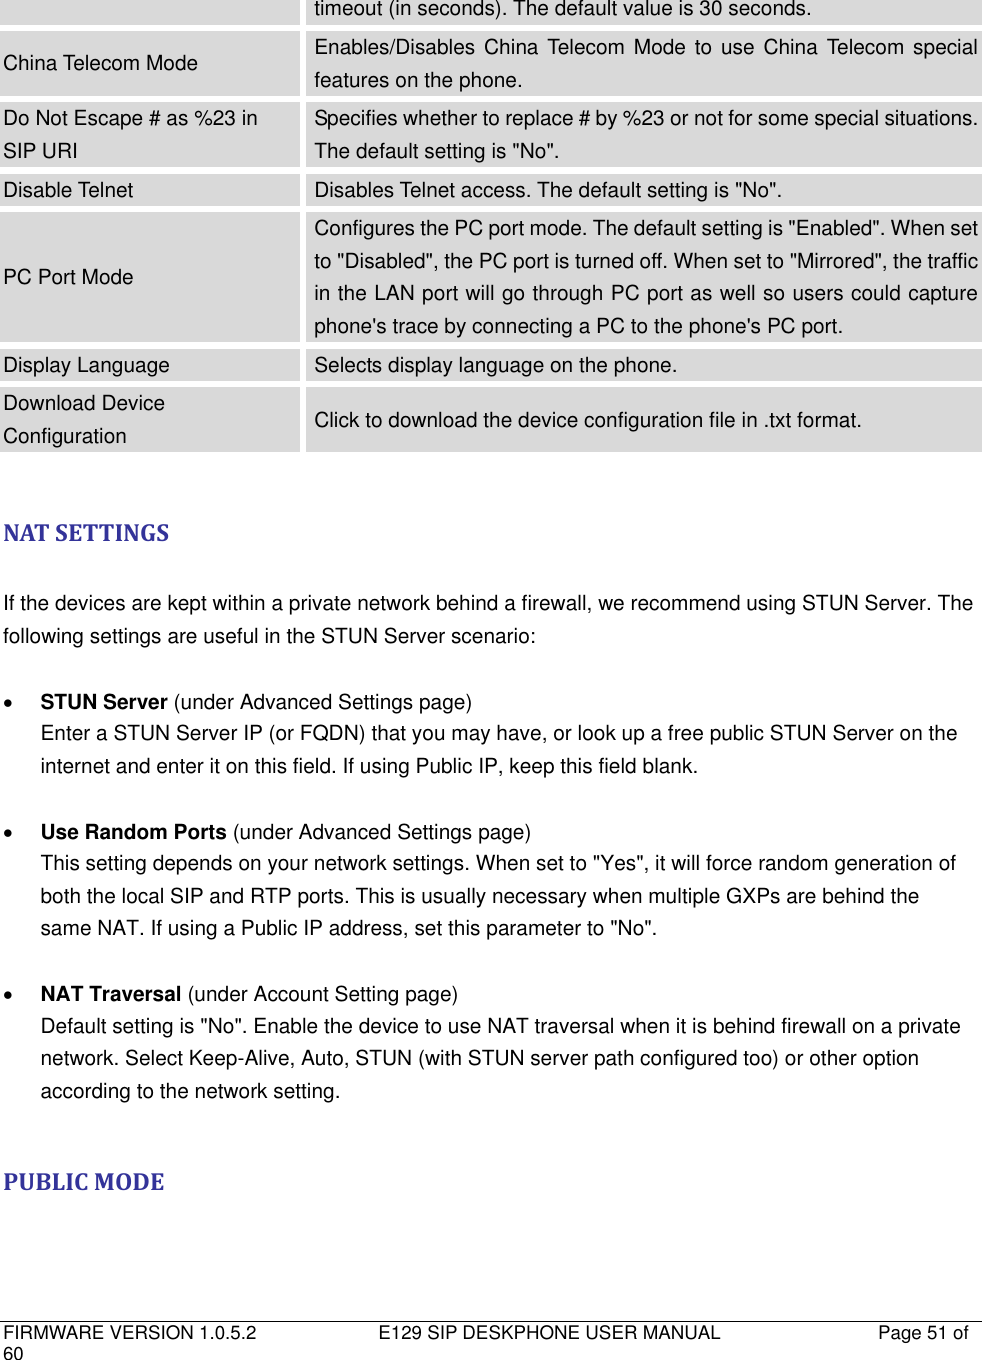   FIRMWARE VERSION 1.0.5.2                          E129 SIP DESKPHONE USER MANUAL           Page 51 of 60                                   timeout (in seconds). The default value is 30 seconds. China Telecom Mode Enables/Disables China Telecom Mode to use China Telecom  special features on the phone. Do Not Escape # as %23 in SIP URI Specifies whether to replace # by %23 or not for some special situations. The default setting is &quot;No&quot;. Disable Telnet Disables Telnet access. The default setting is &quot;No&quot;. PC Port Mode Configures the PC port mode. The default setting is &quot;Enabled&quot;. When set to &quot;Disabled&quot;, the PC port is turned off. When set to &quot;Mirrored&quot;, the traffic in the LAN port will go through PC port as well so users could capture phone&apos;s trace by connecting a PC to the phone&apos;s PC port.     Display Language Selects display language on the phone. Download Device Configuration Click to download the device configuration file in .txt format.  NAT SETTINGS  If the devices are kept within a private network behind a firewall, we recommend using STUN Server. The following settings are useful in the STUN Server scenario:   STUN Server (under Advanced Settings page) Enter a STUN Server IP (or FQDN) that you may have, or look up a free public STUN Server on the internet and enter it on this field. If using Public IP, keep this field blank.   Use Random Ports (under Advanced Settings page) This setting depends on your network settings. When set to &quot;Yes&quot;, it will force random generation of both the local SIP and RTP ports. This is usually necessary when multiple GXPs are behind the same NAT. If using a Public IP address, set this parameter to &quot;No&quot;.   NAT Traversal (under Account Setting page) Default setting is &quot;No&quot;. Enable the device to use NAT traversal when it is behind firewall on a private network. Select Keep-Alive, Auto, STUN (with STUN server path configured too) or other option according to the network setting.  PUBLIC MODE  